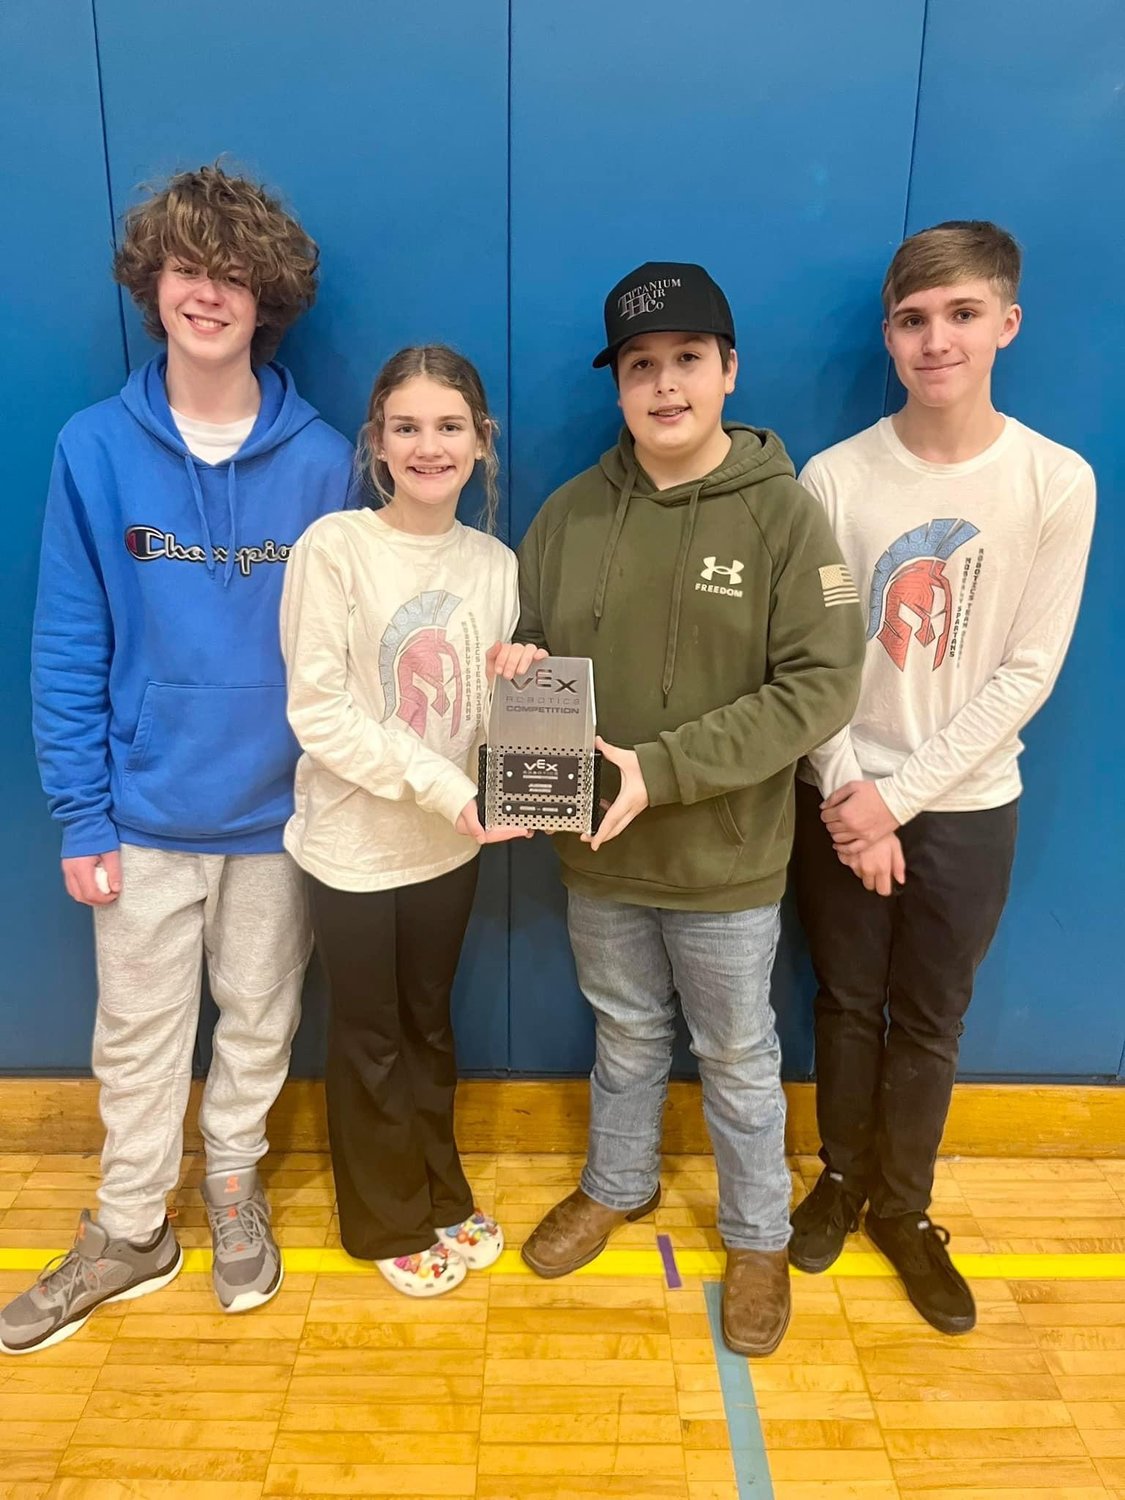 In this file photo, Moberly's Junior ROTC robotics team, Marshall Dixson, Zoe Mudd, Austin Kitchen and Gage Ferguson, hold an award they earned during a competition in January.